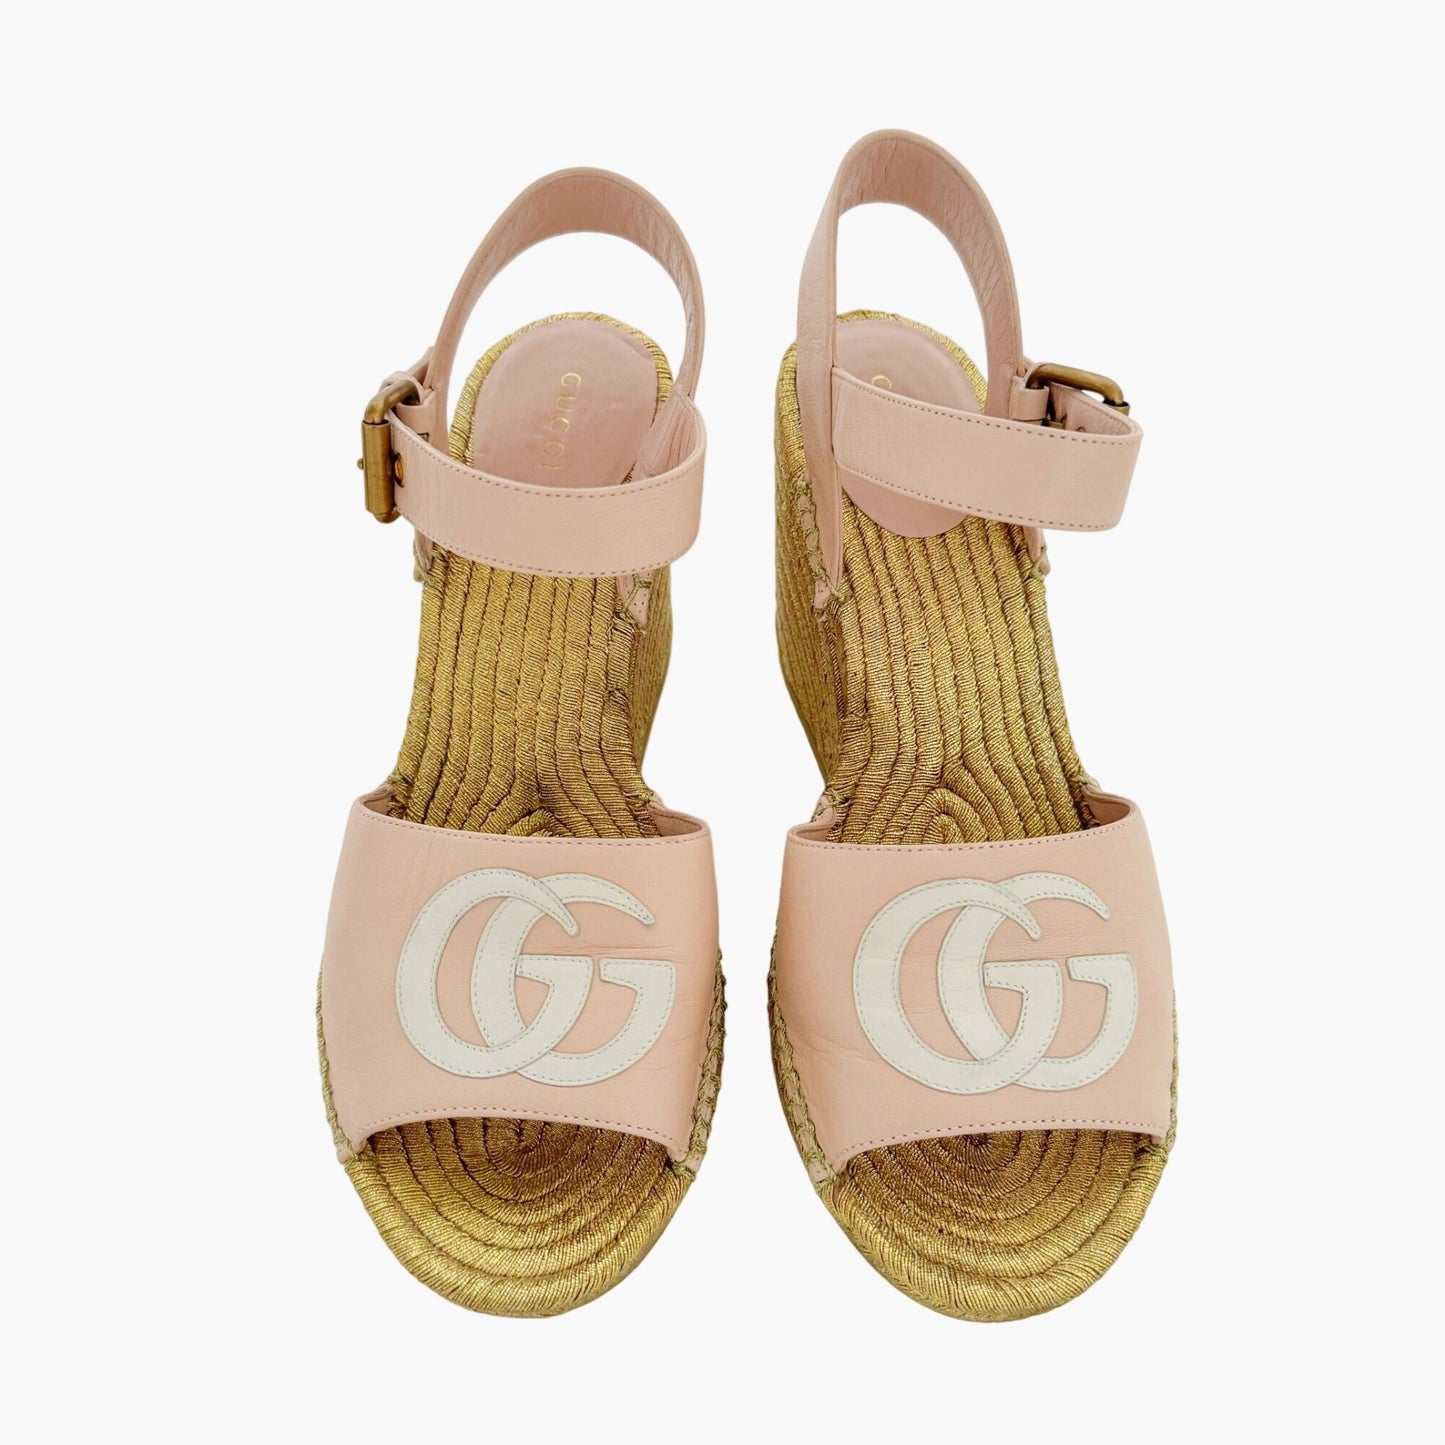 Gucci Flor GG Espadrille Wedge Sandals in Pink & Gold Leather Size 39